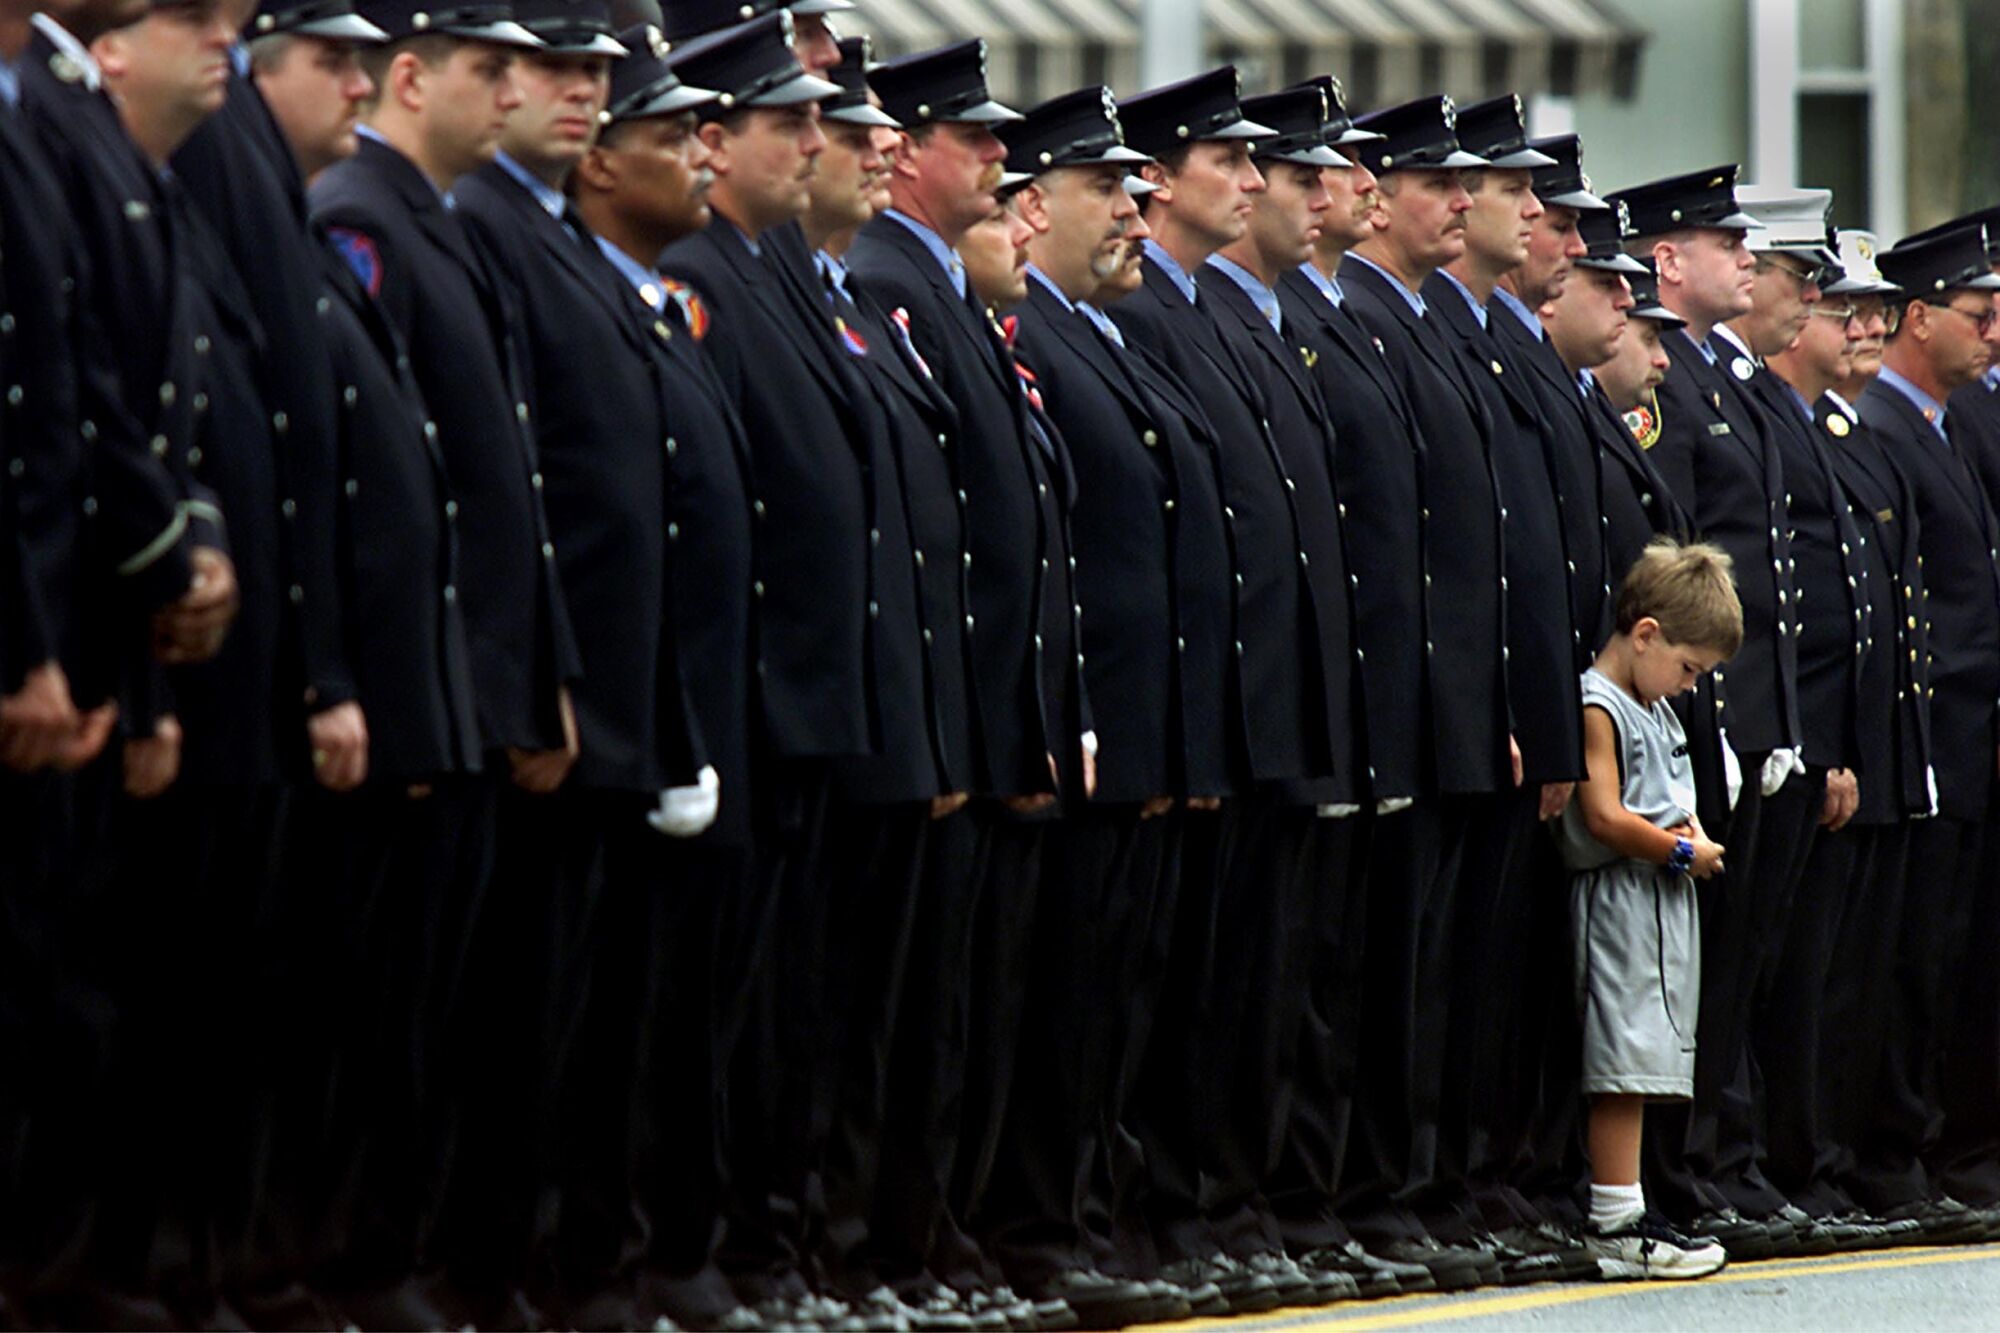 A small boy stands before a long line of firefighters